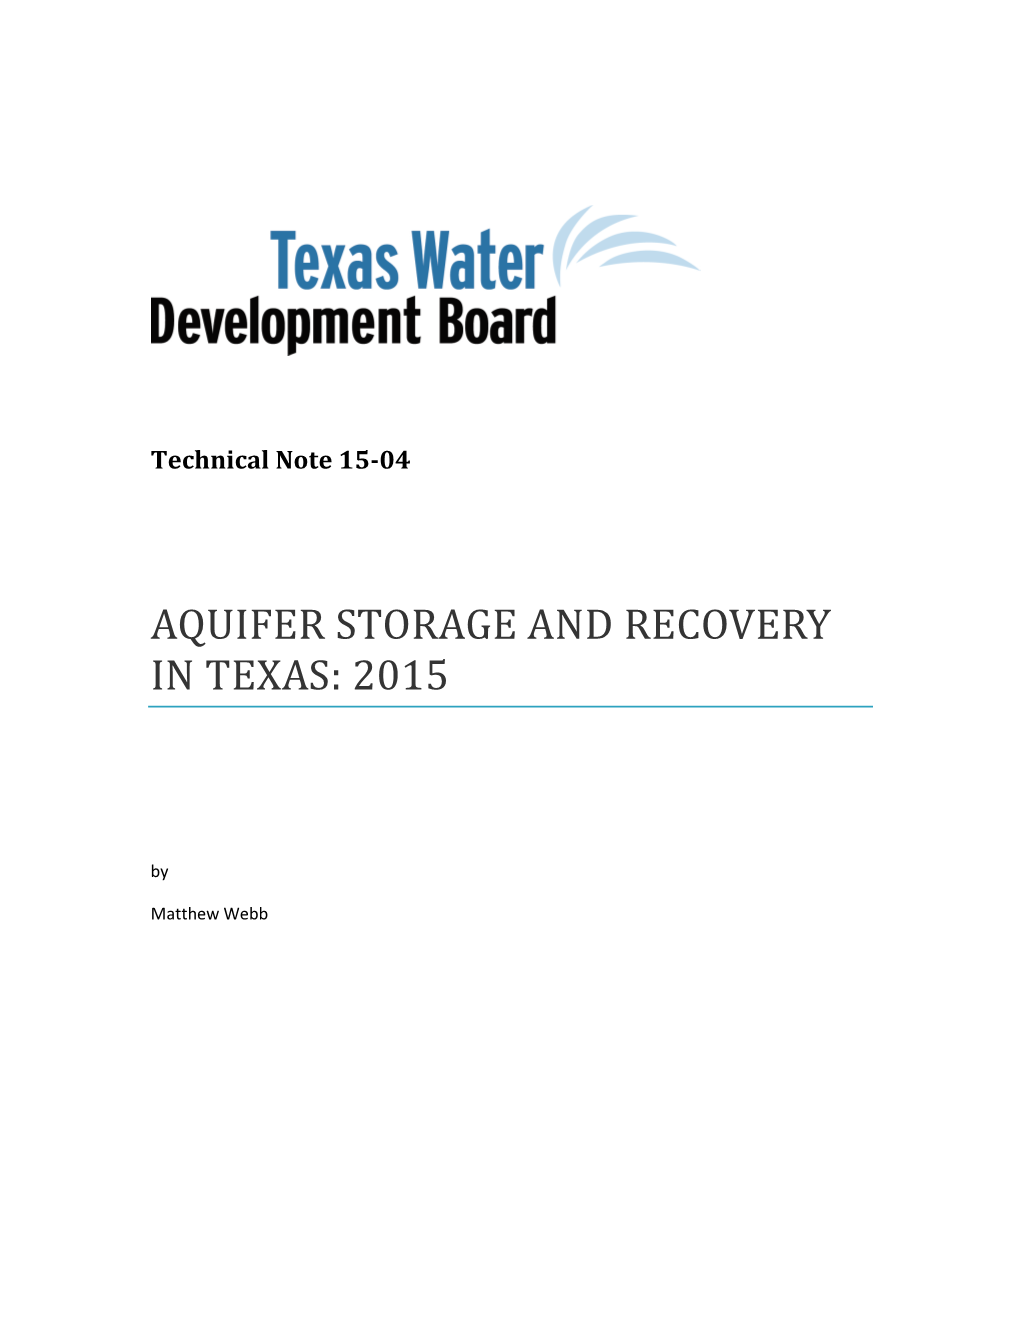 Technical Note 15-04 Aquifer Storage and Recovery in Texas: 2015